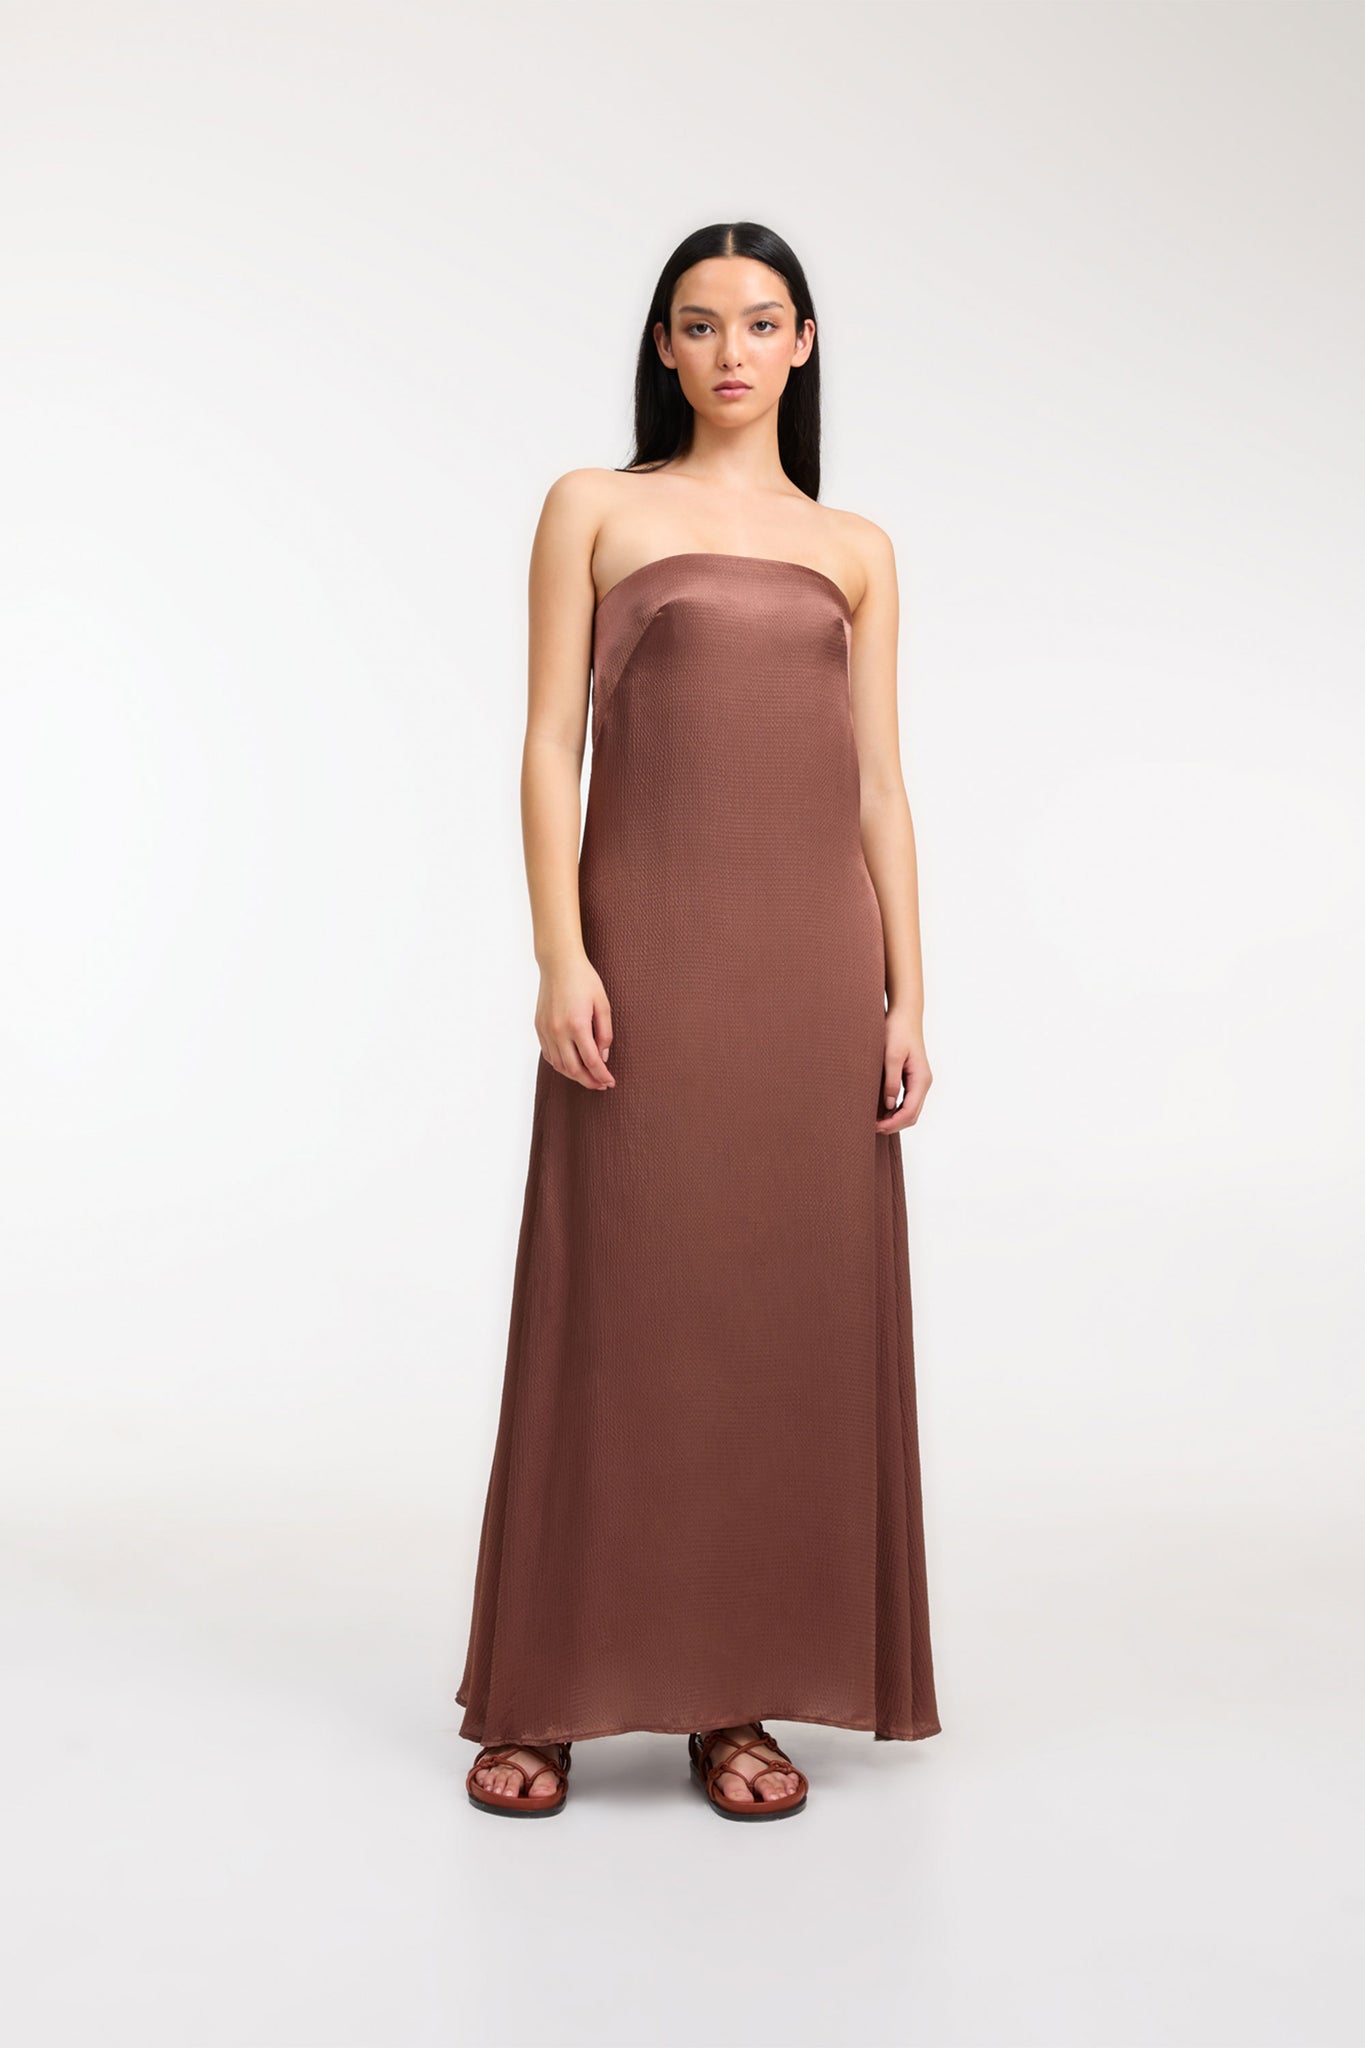 ROAME ARCH DRESS IN COCOA